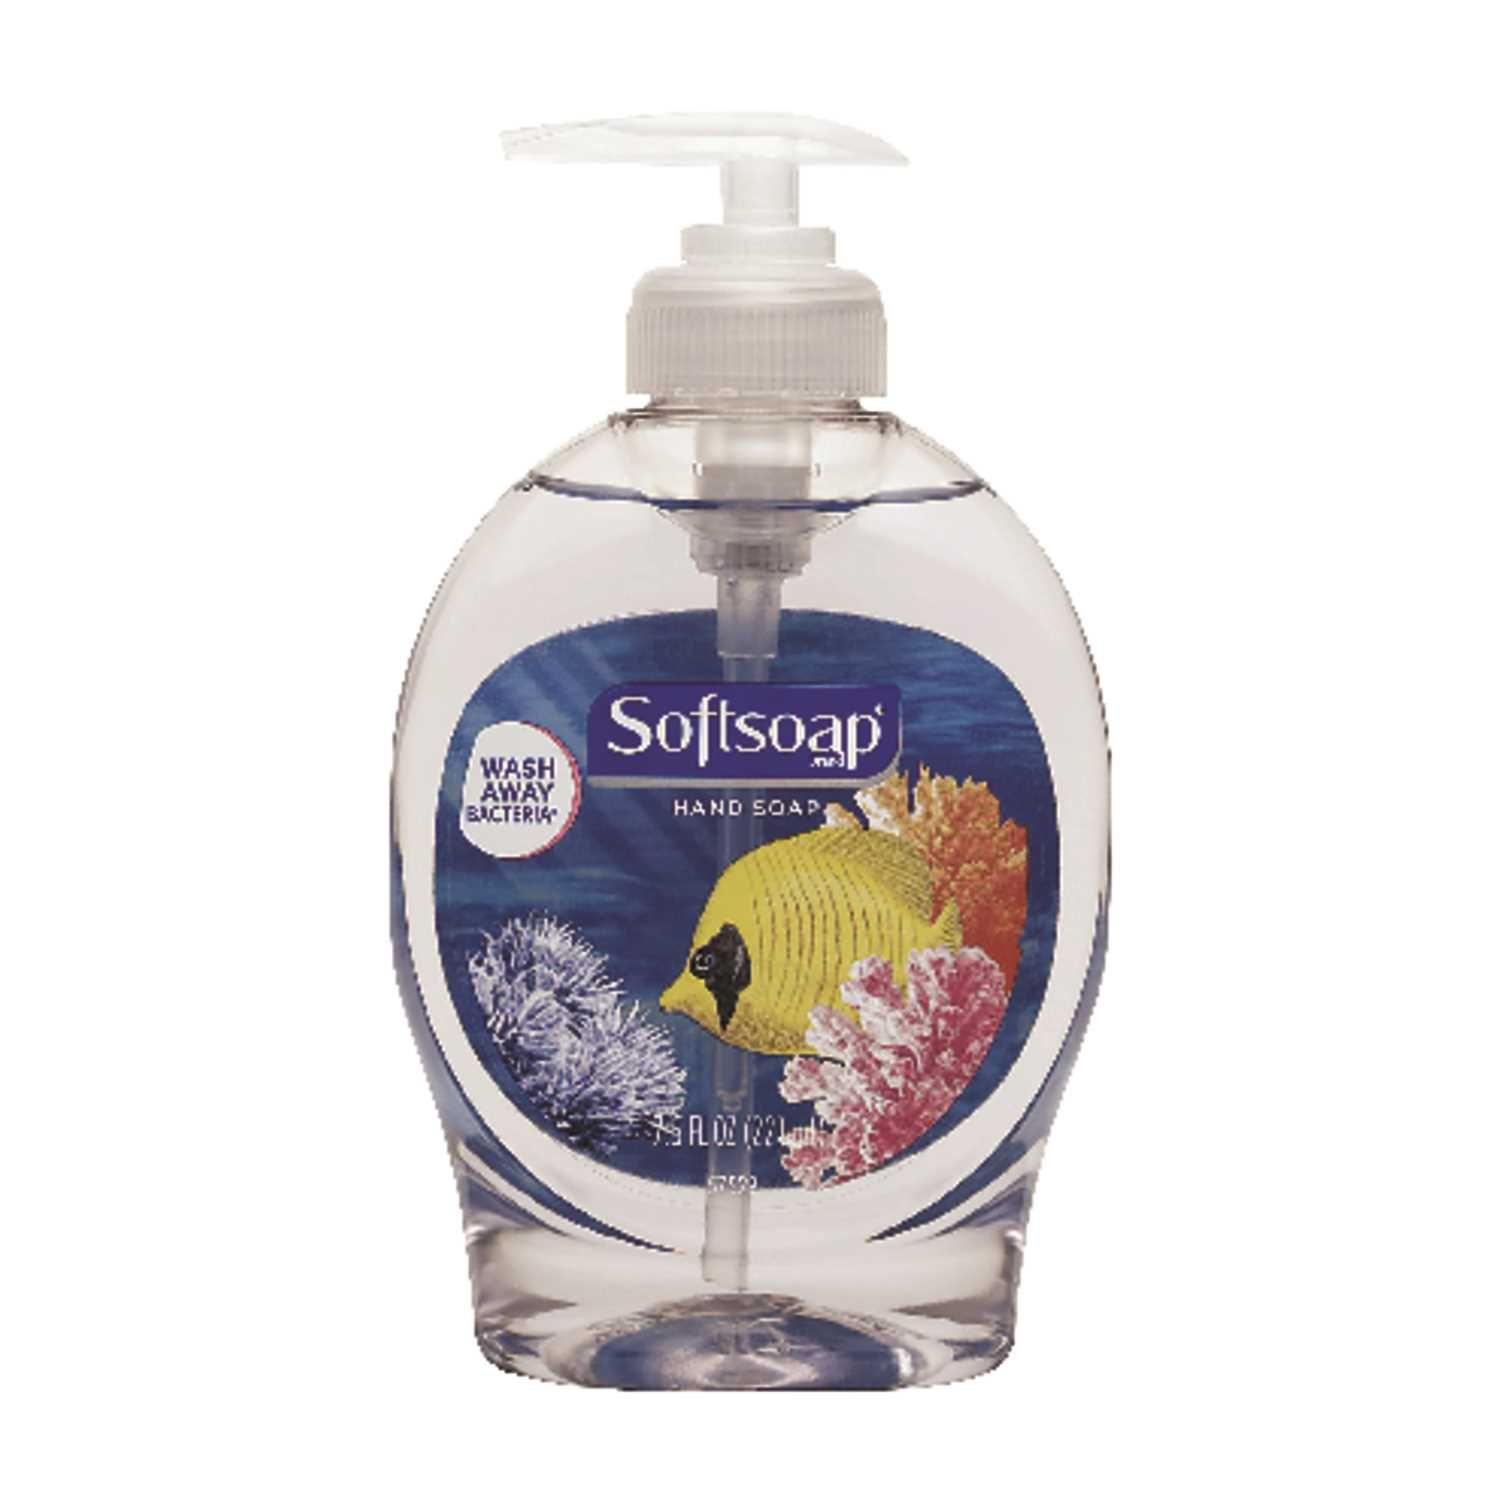 Softsoap Logo - Softsoap Unscented Scent Antibacterial Liquid Hand Soap